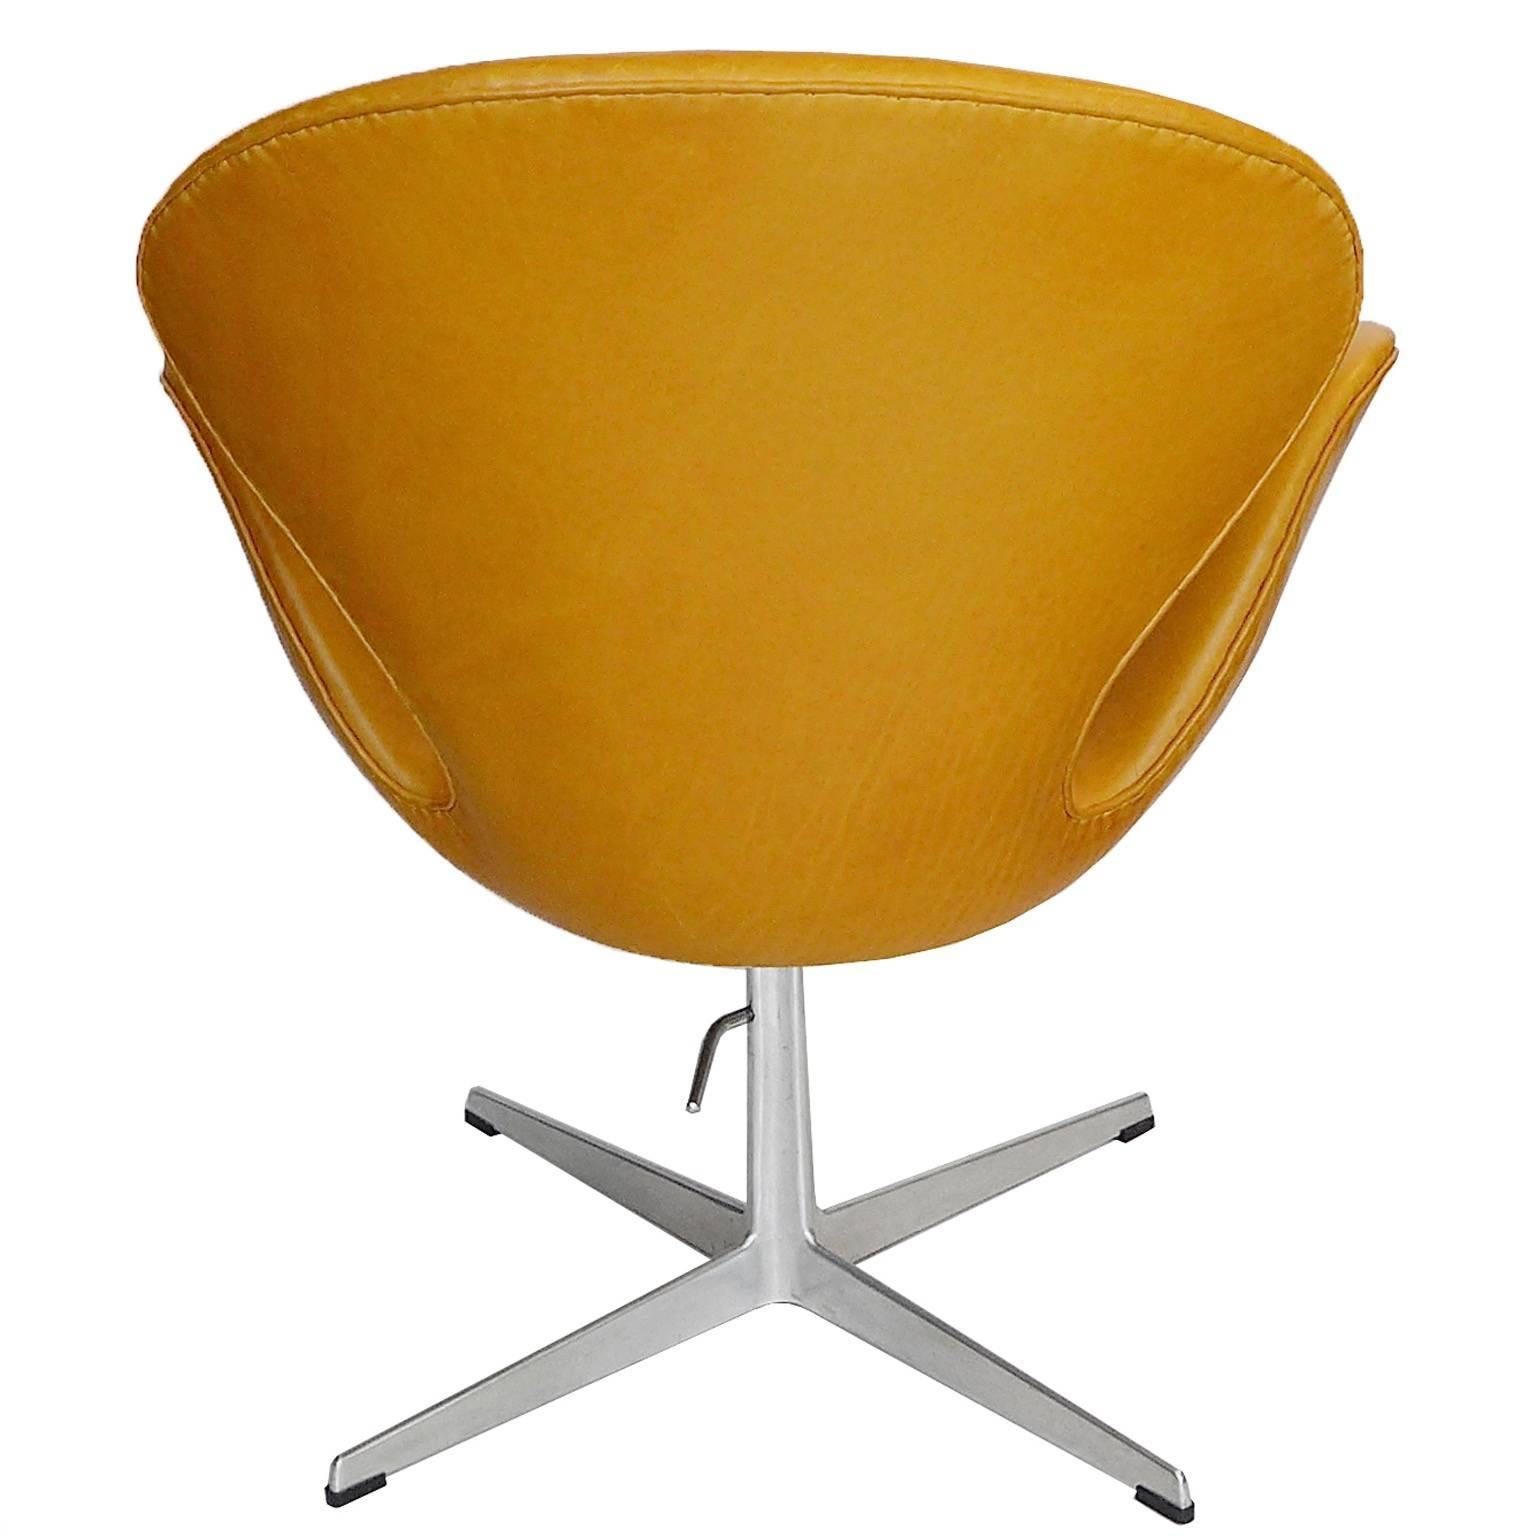 This is a rare golden tan leather adjustable swan chair. It is a great chair. This variation was manufactured by Fritz Hansen for a very short time. The seat adjusts from 16.5”-20”. It can adjust in height from the standard swan lounge height to a